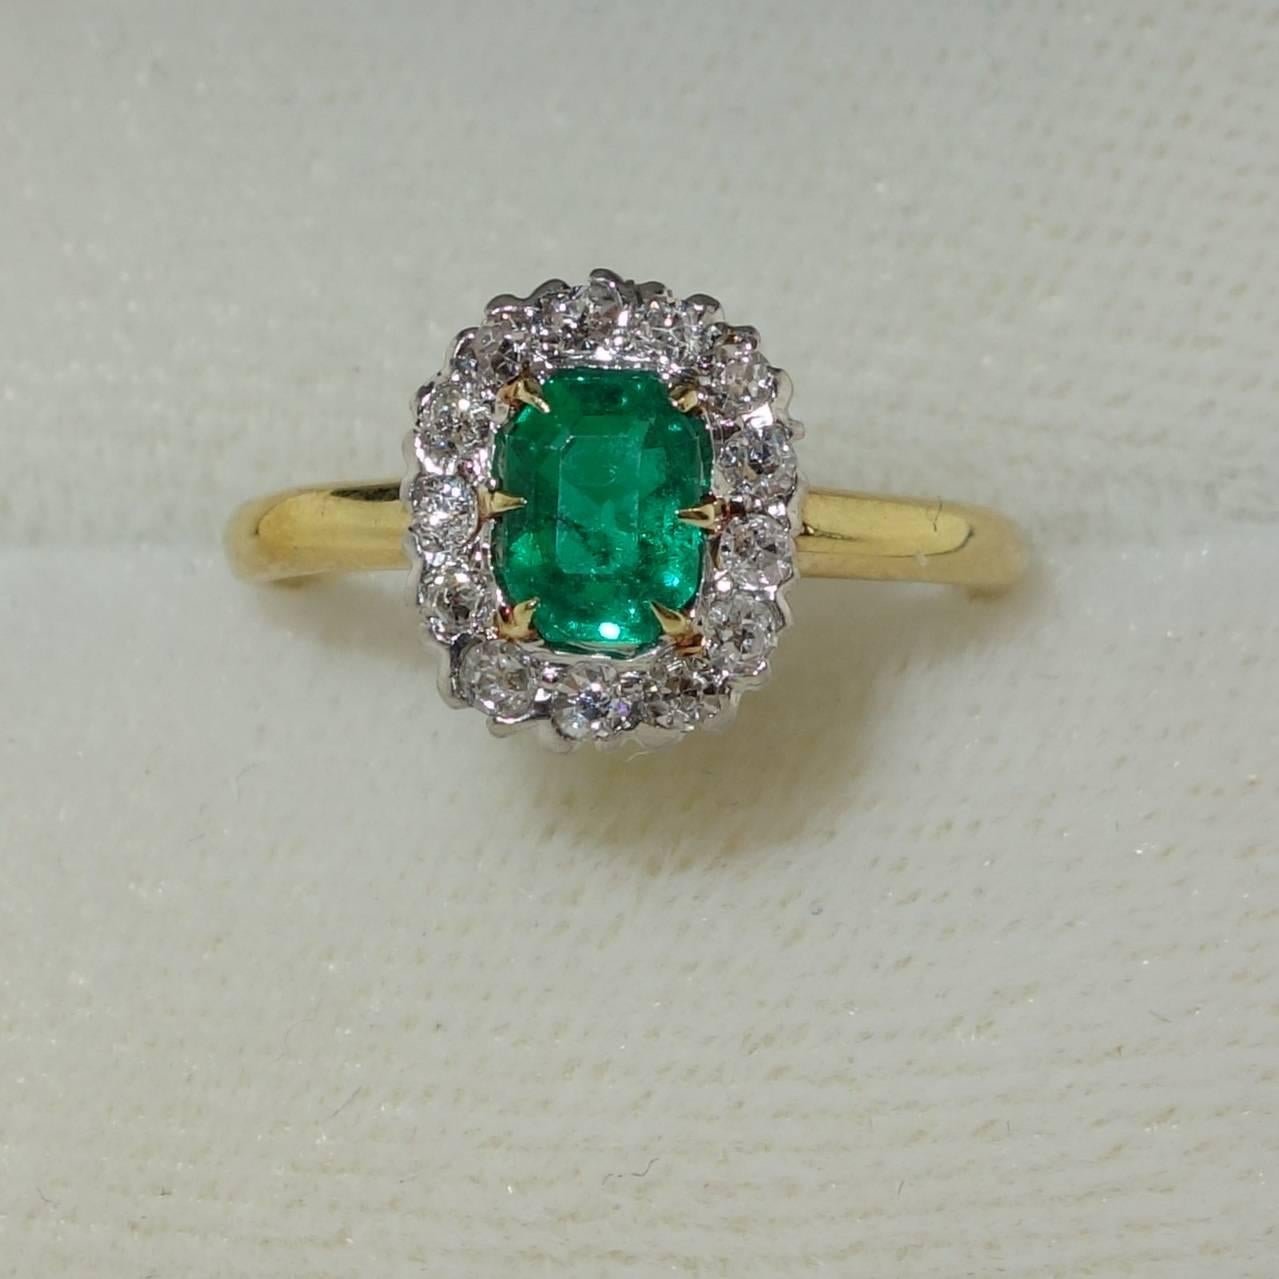 A bright green Colombian emerald is surrounded by 13 old cut diamonds -  all near colorless and very slightly included.  The total diamond weight is approximately .33 cts.  The emerald-cut emerald displays an even clear, medium green color and